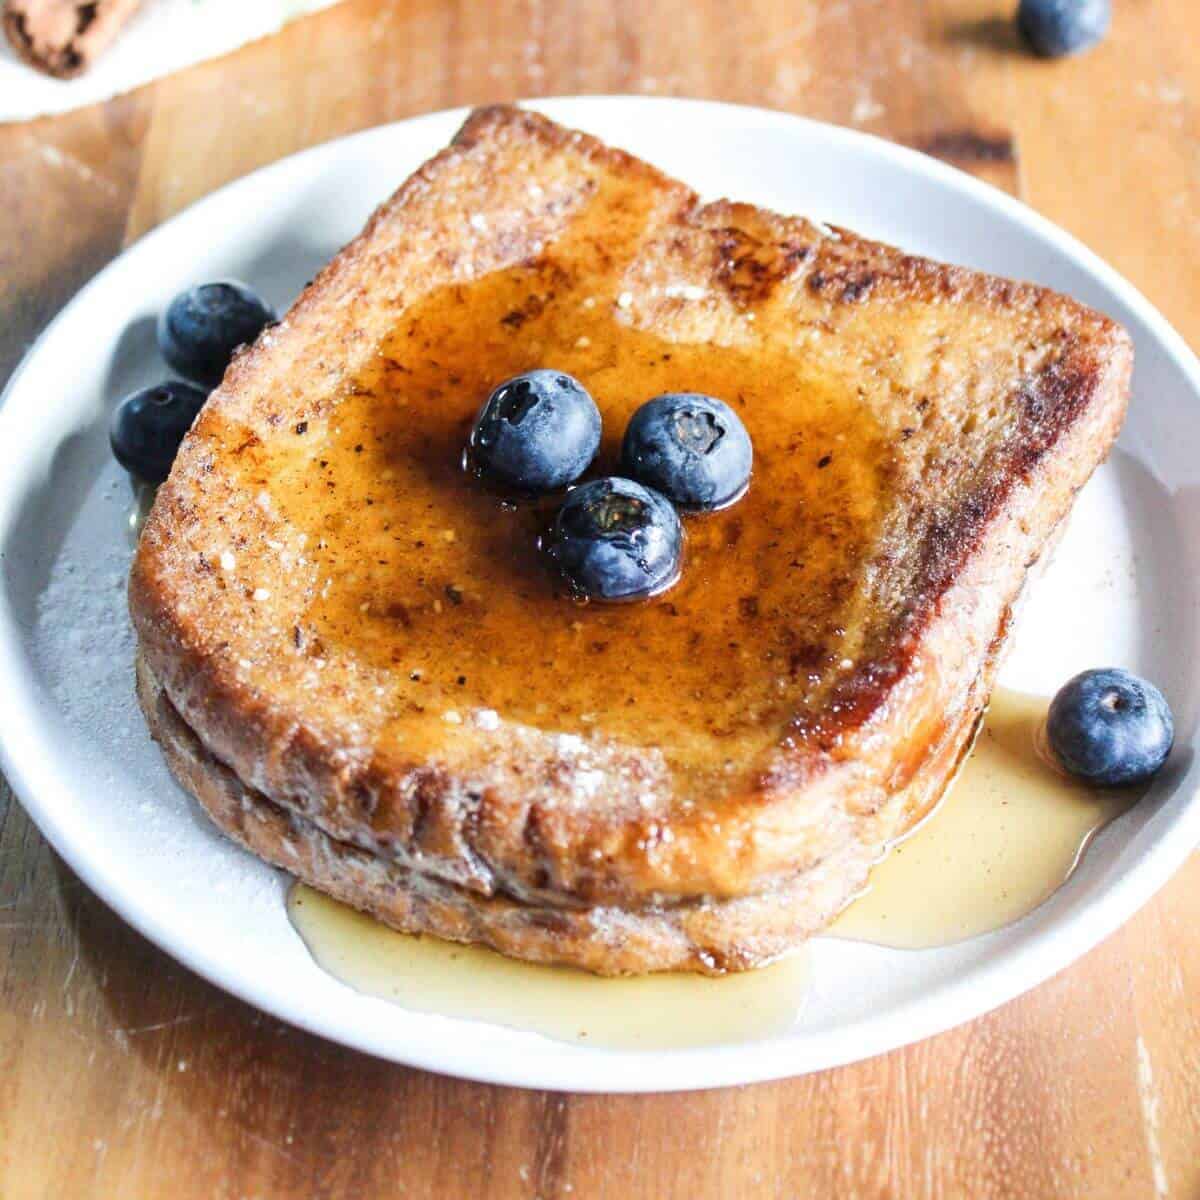 Air fryer french toast slices with syrup and blueberries on plate.